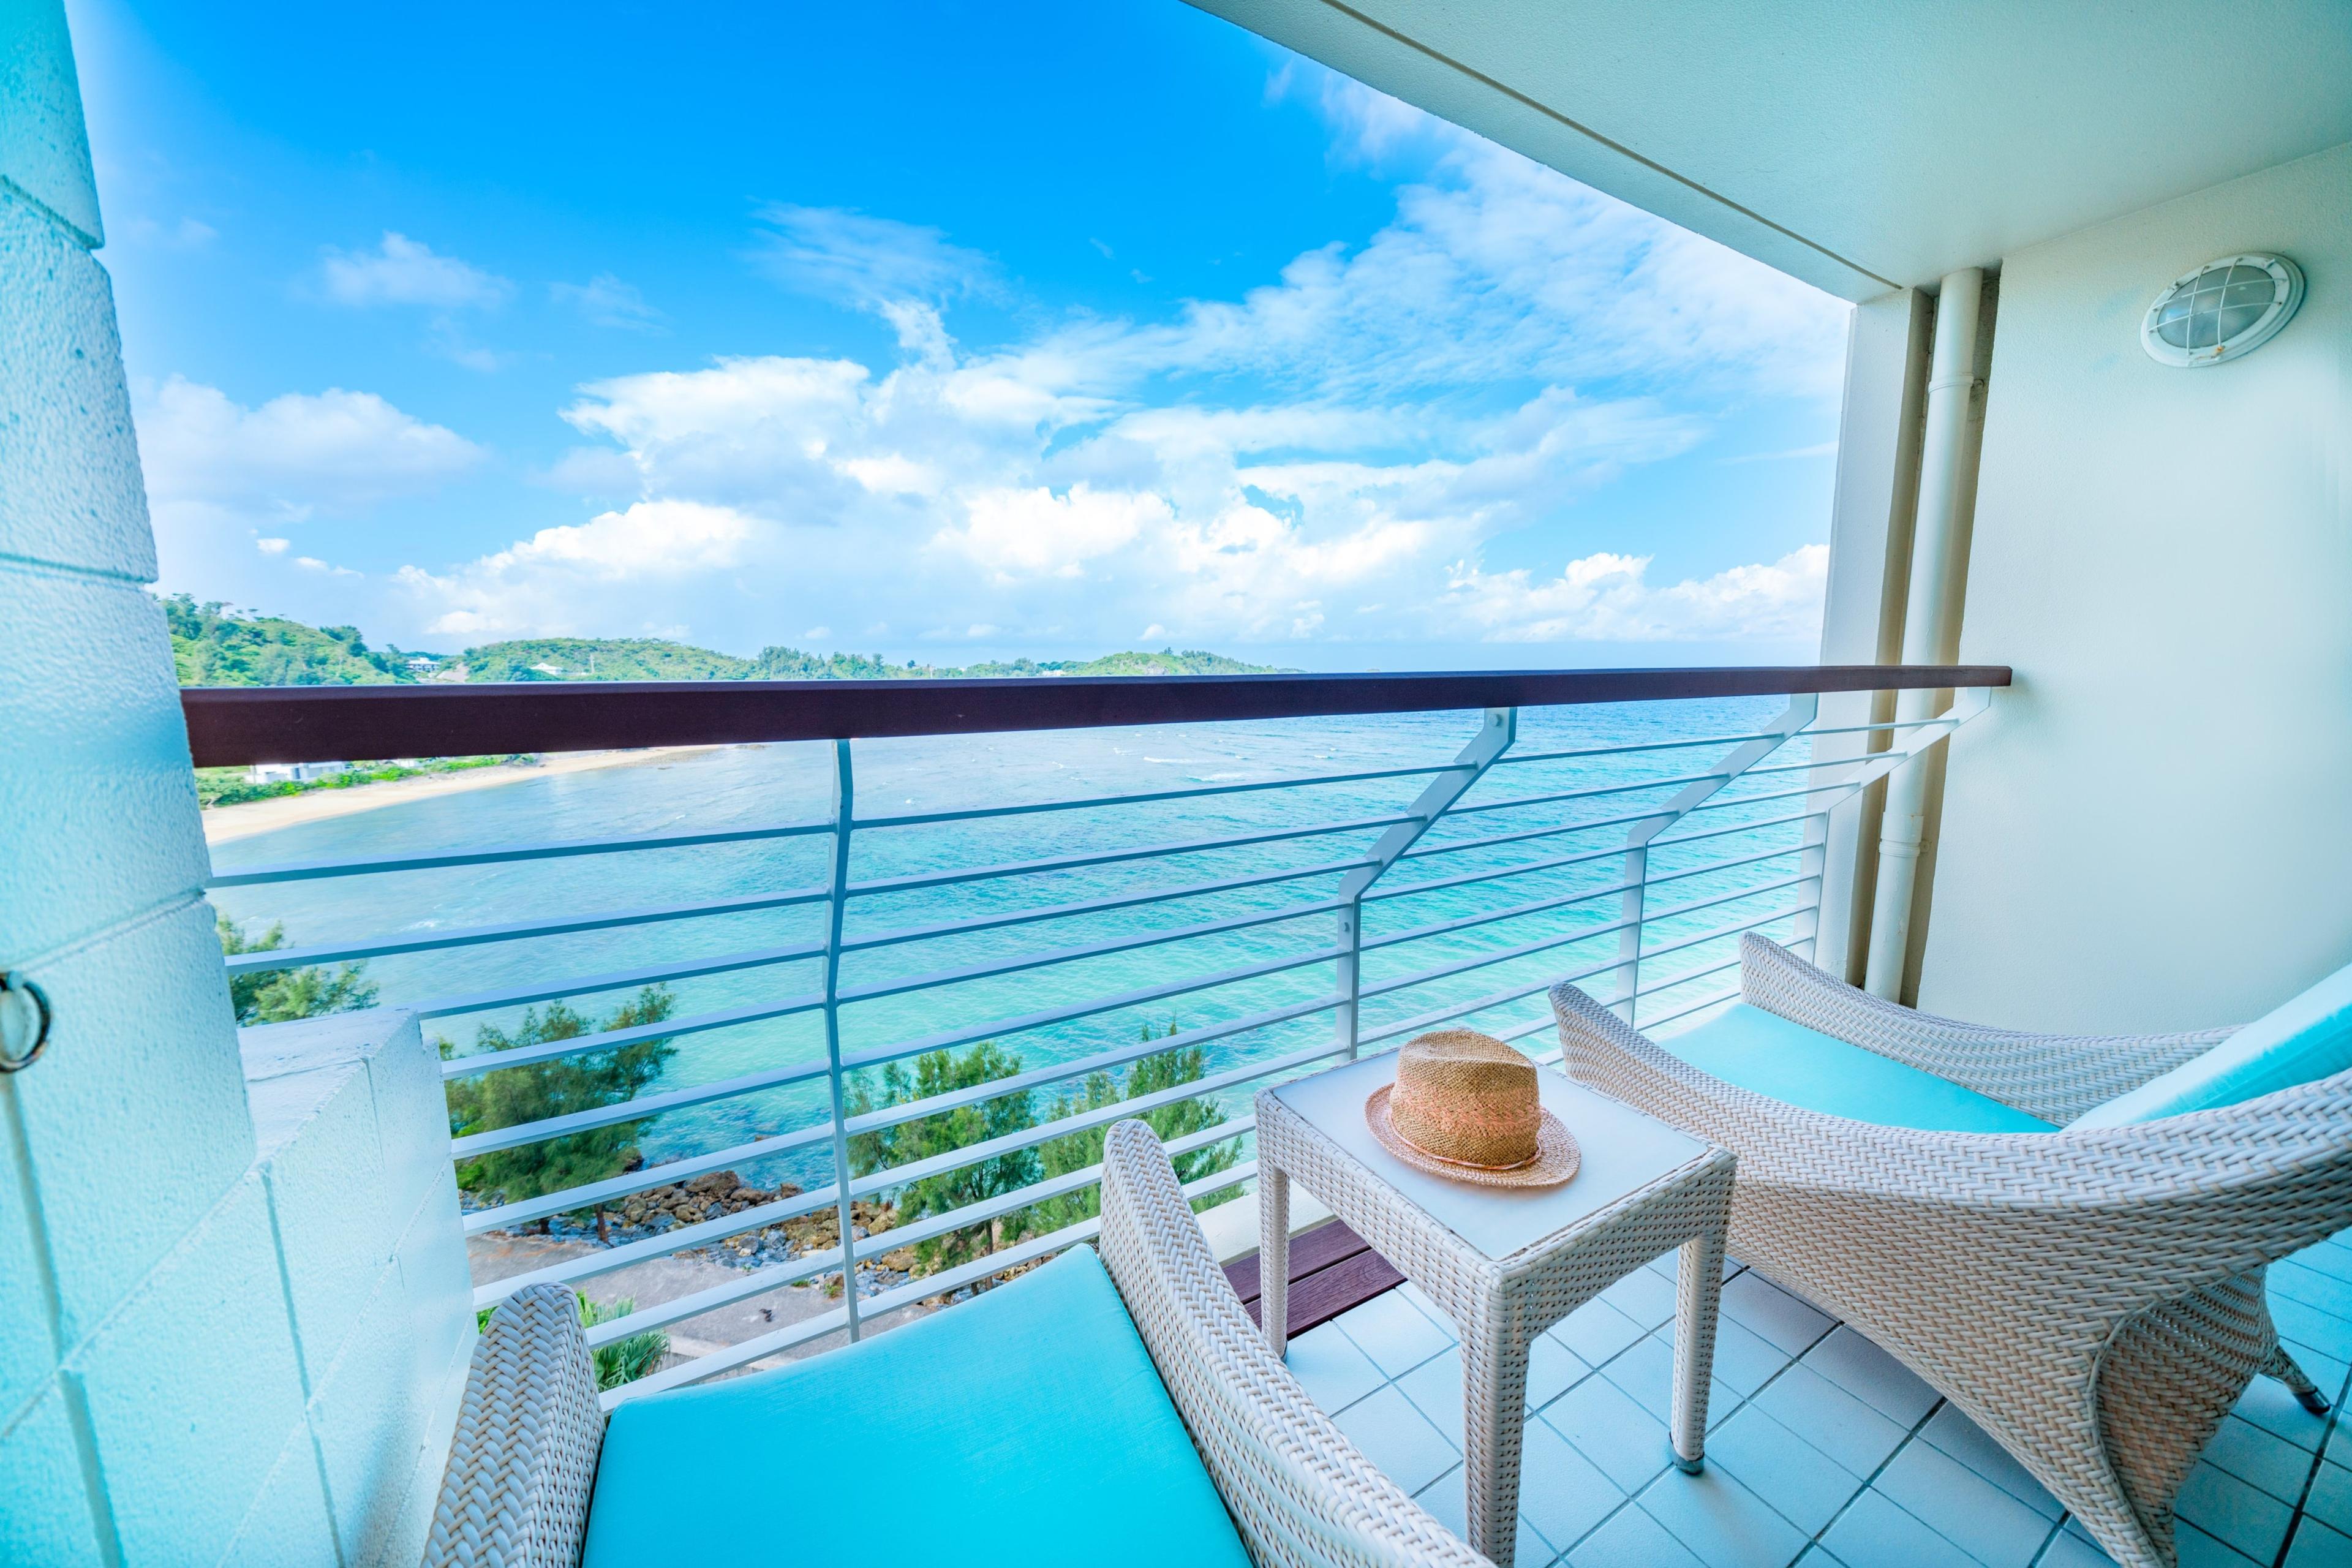 A splendid ocean view is a perfect complement to your relaxing times.